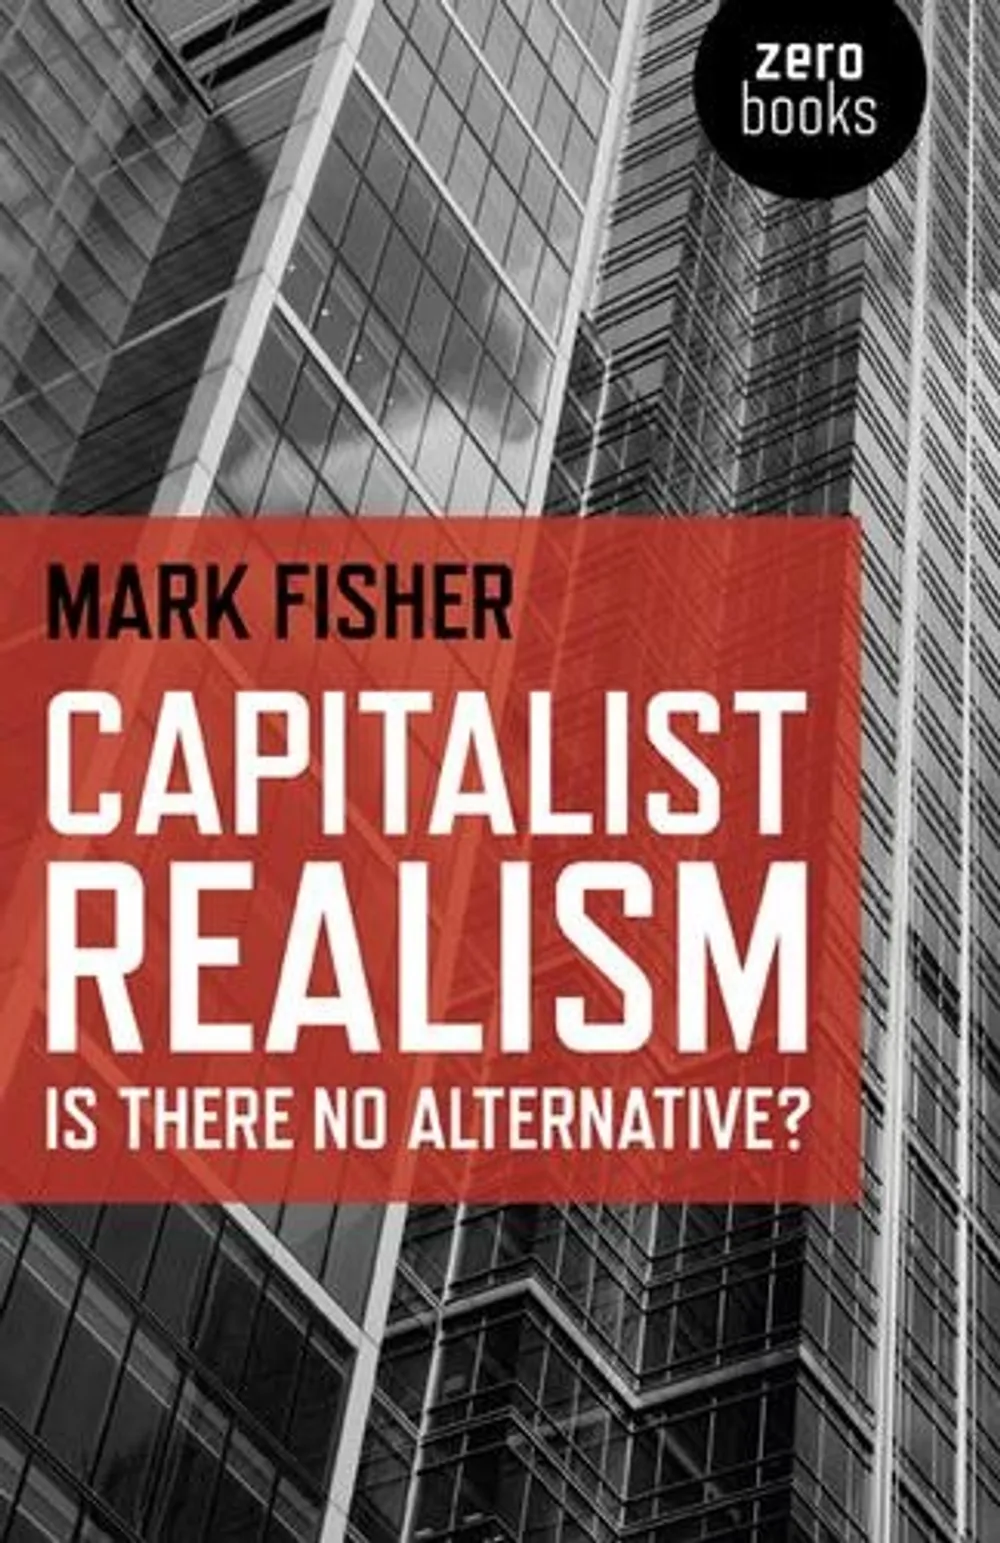 Capitalist Realism, by Mark Fisher